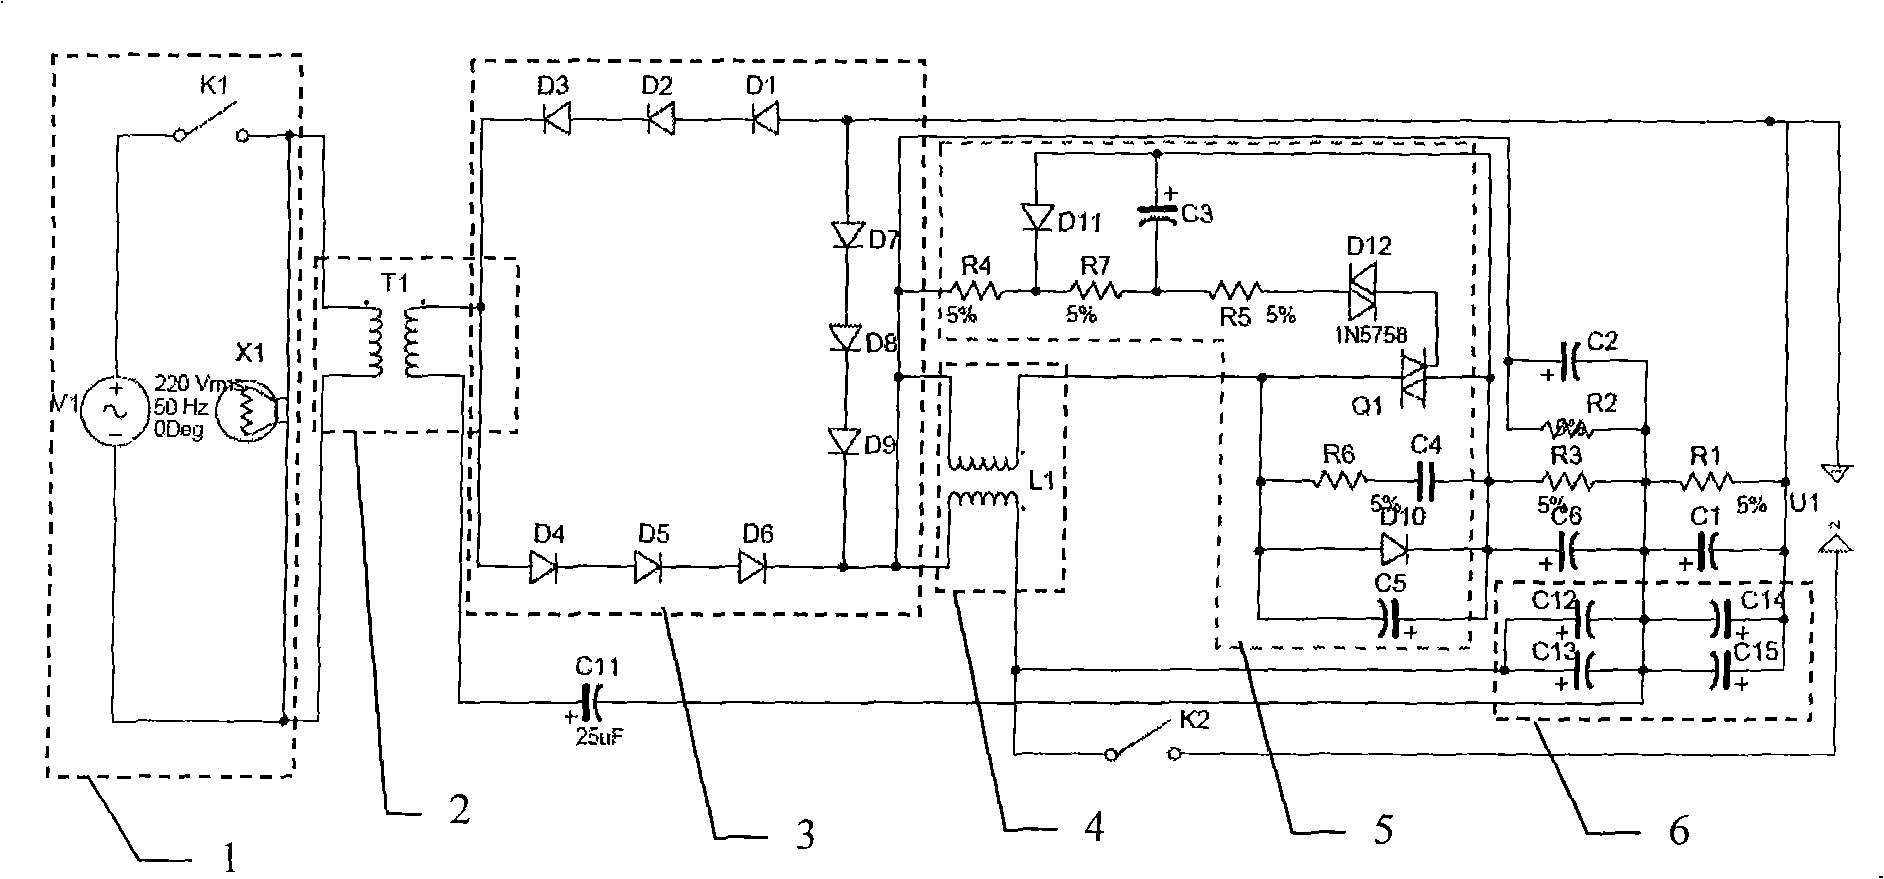 High energy electronic ignition system for high pressure gas well